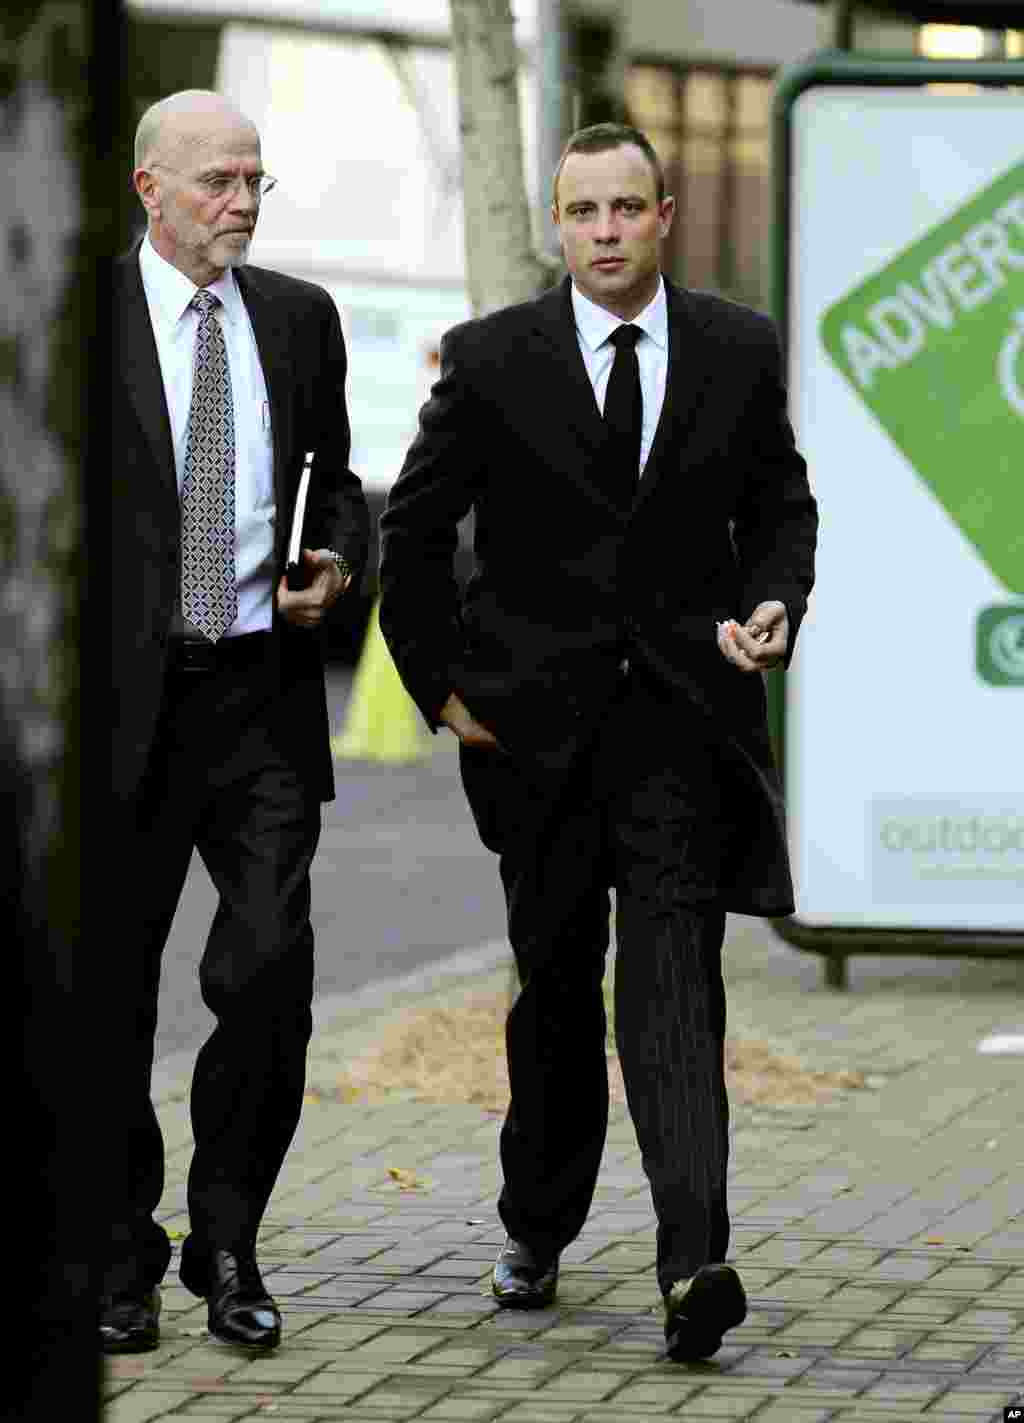 Oscar Pistorius (right) accompanied by his uncle, Arnold Pistorius, arrives at the high court in Pretoria, South Africa, May 20, 2014.